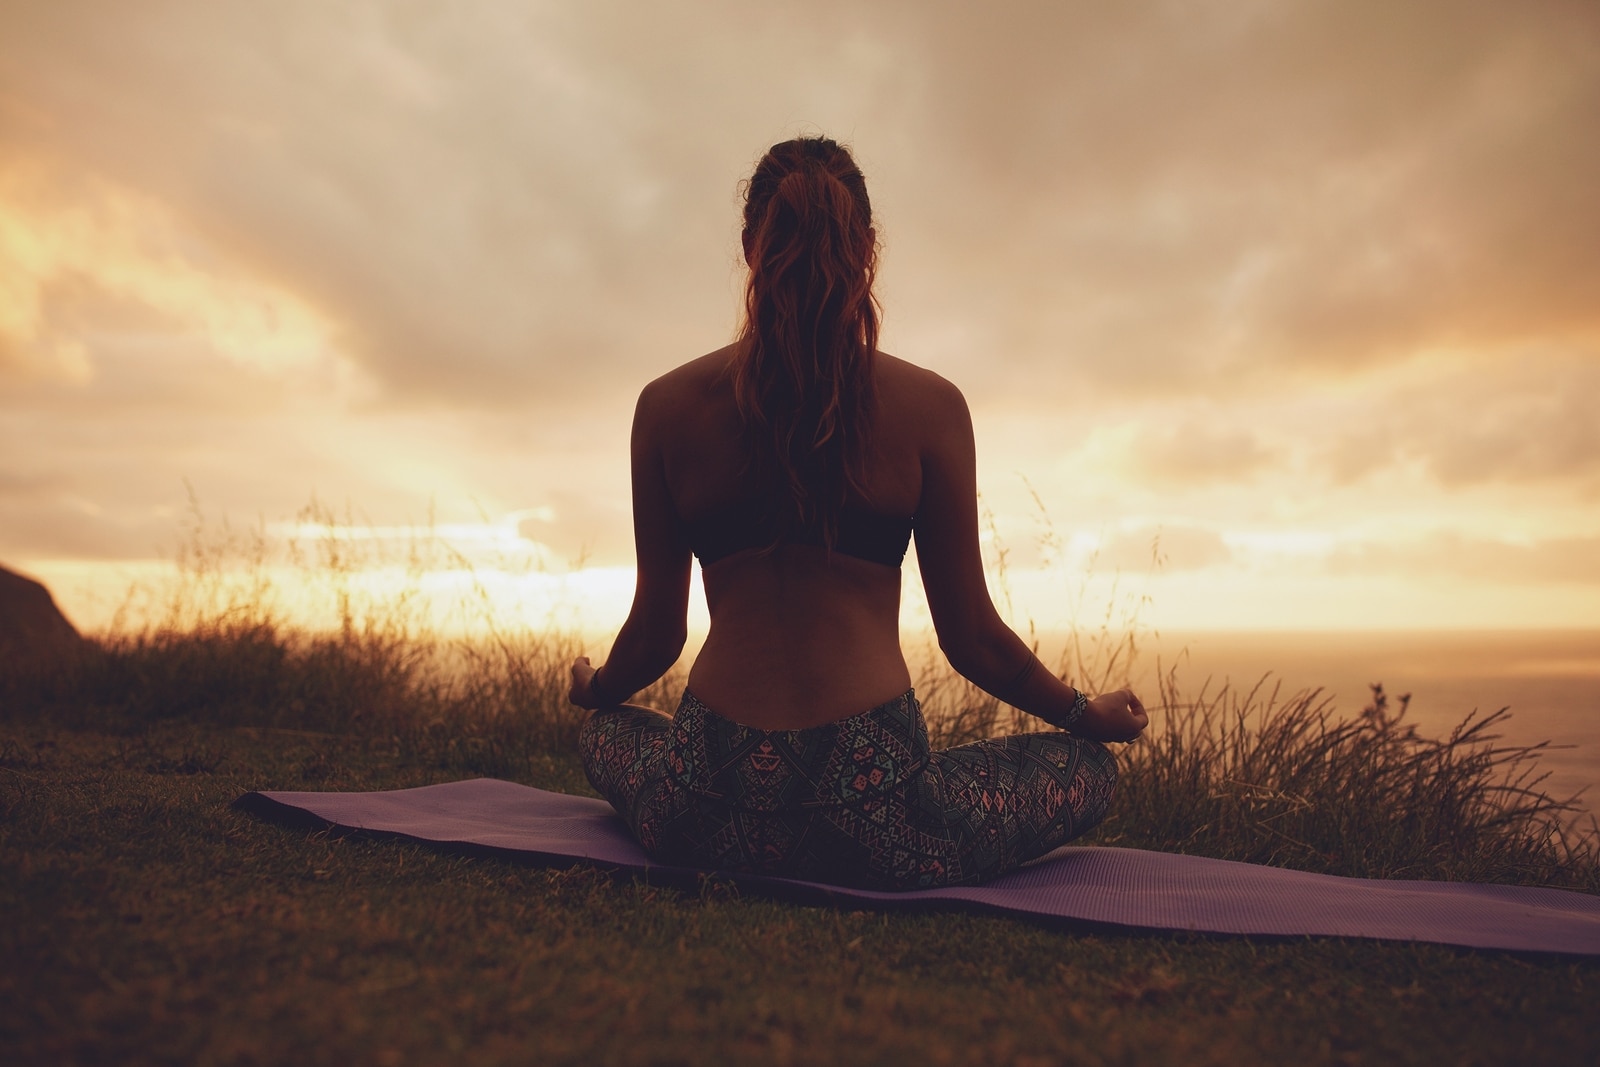 Silhouette rear view of young woman doing yoga meditation outdoors. Fitness female model sitting on exercise mat in lotus yoga pose during sunset.